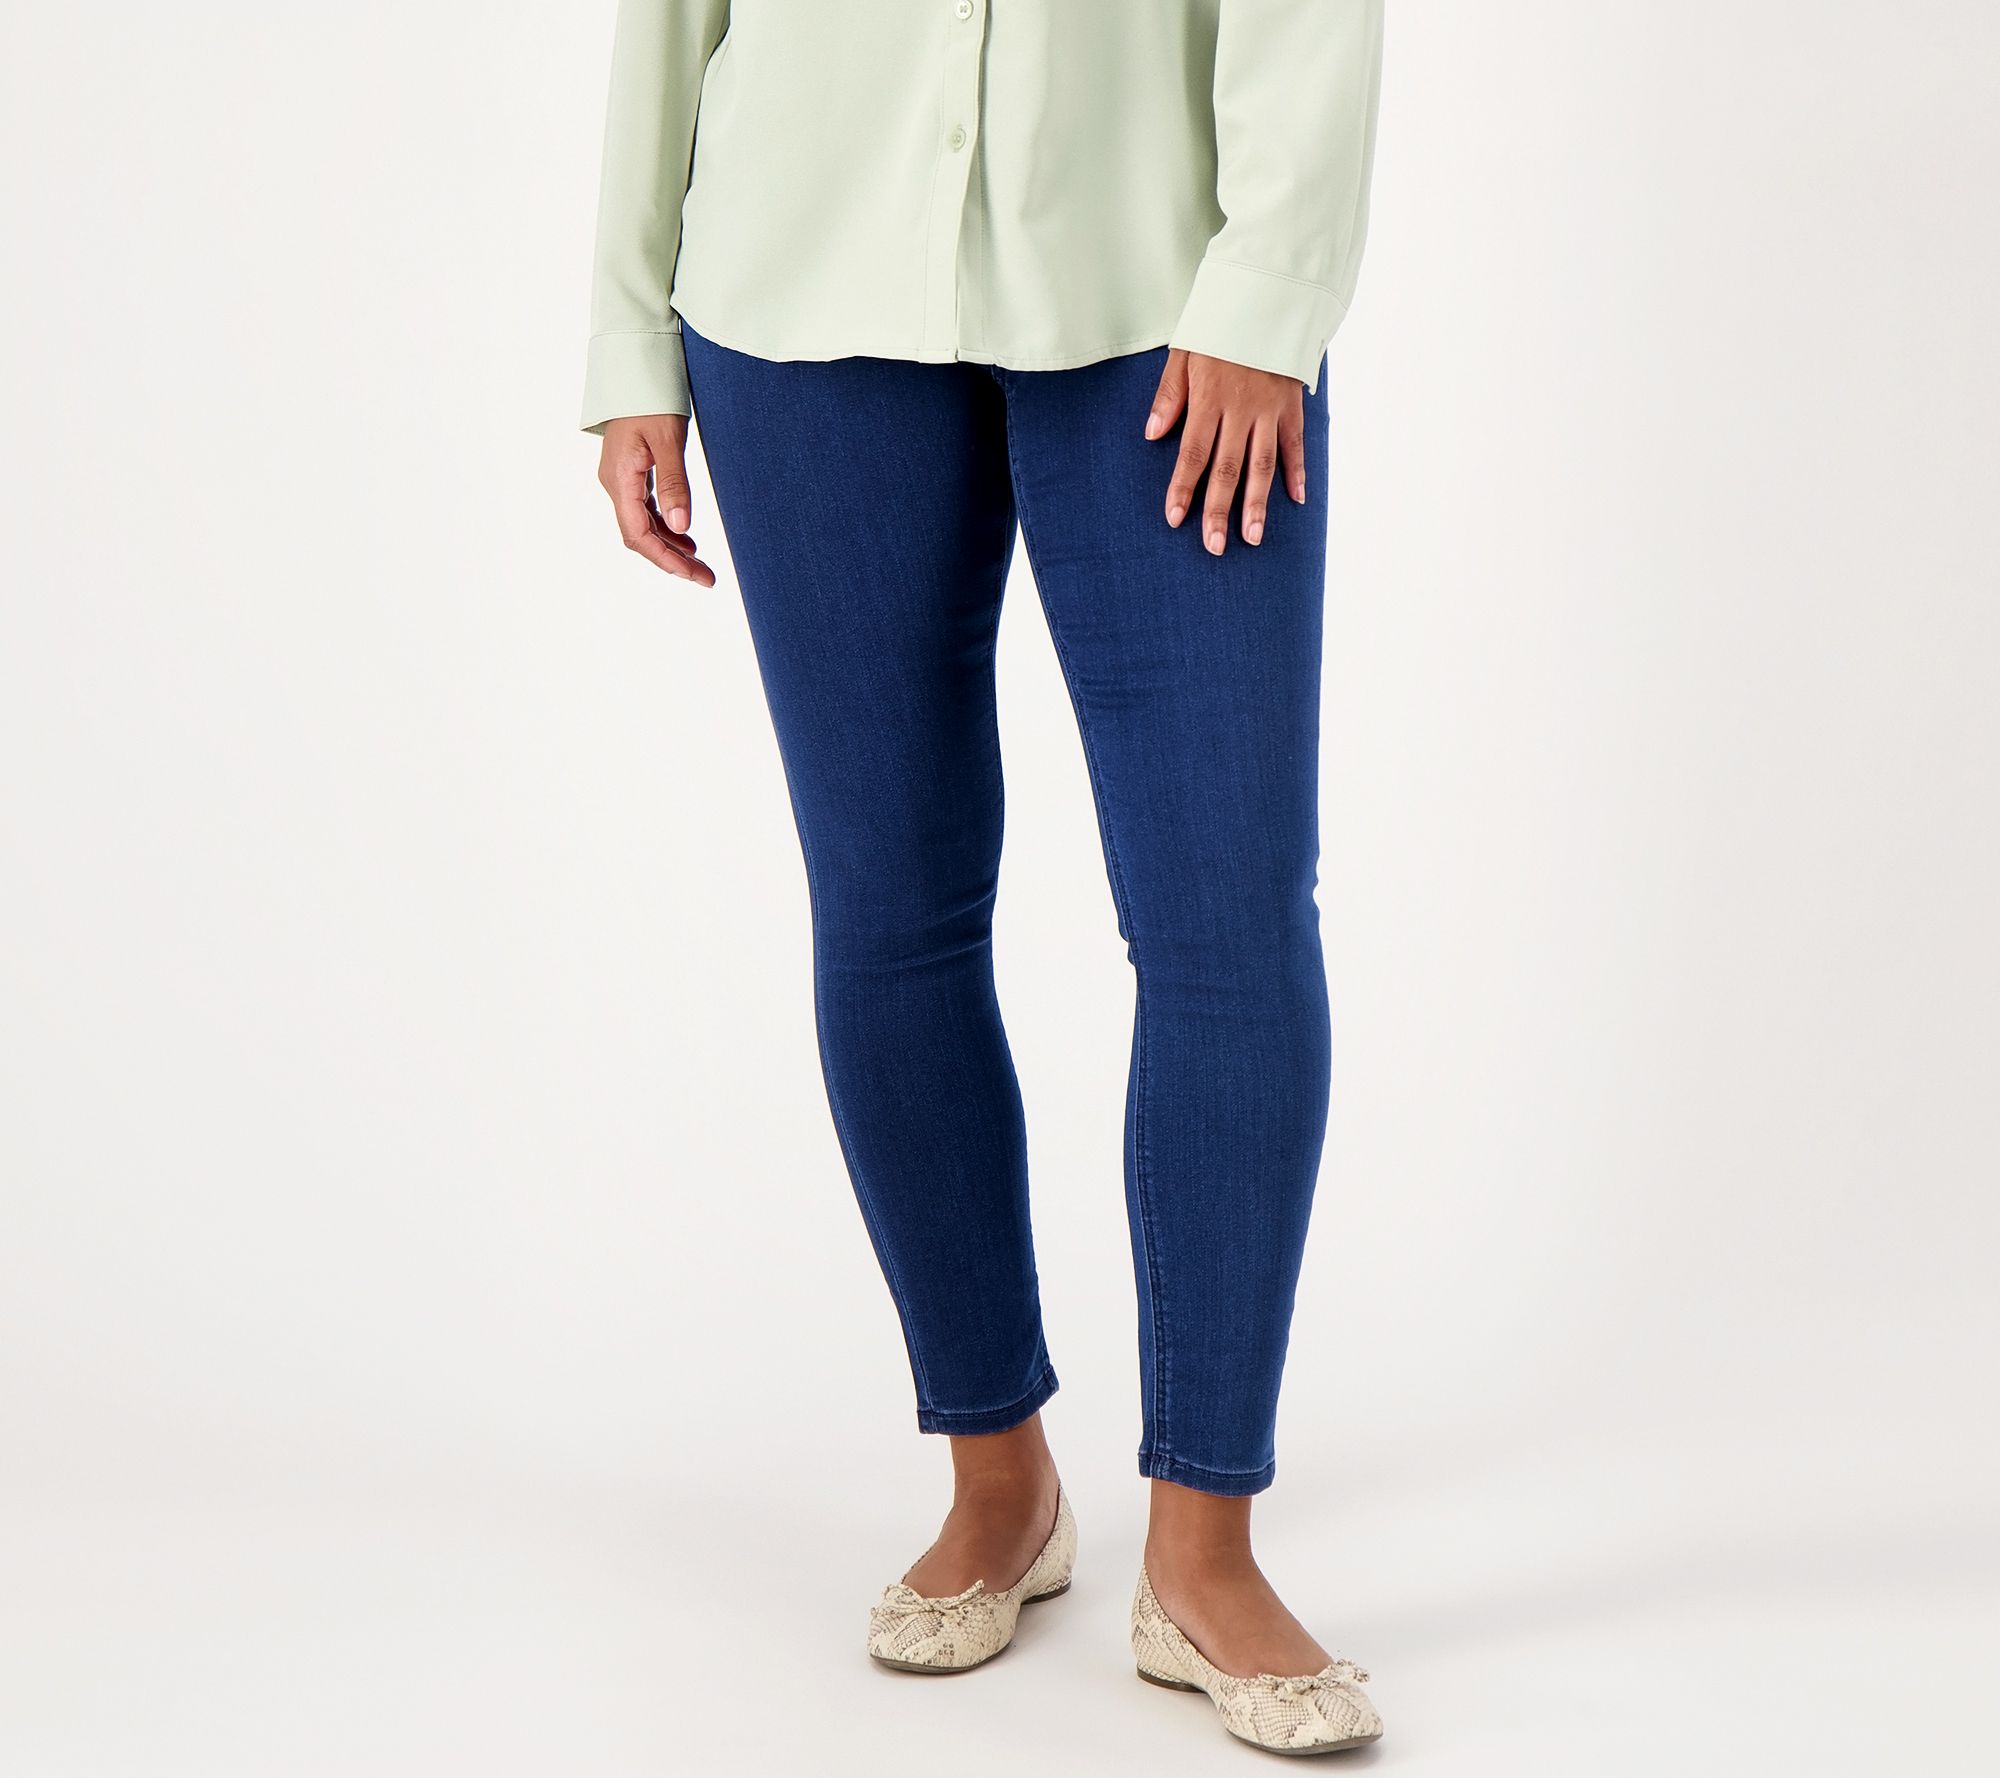 Denim & Co. Tall Silky Comfy Knit Jegging 